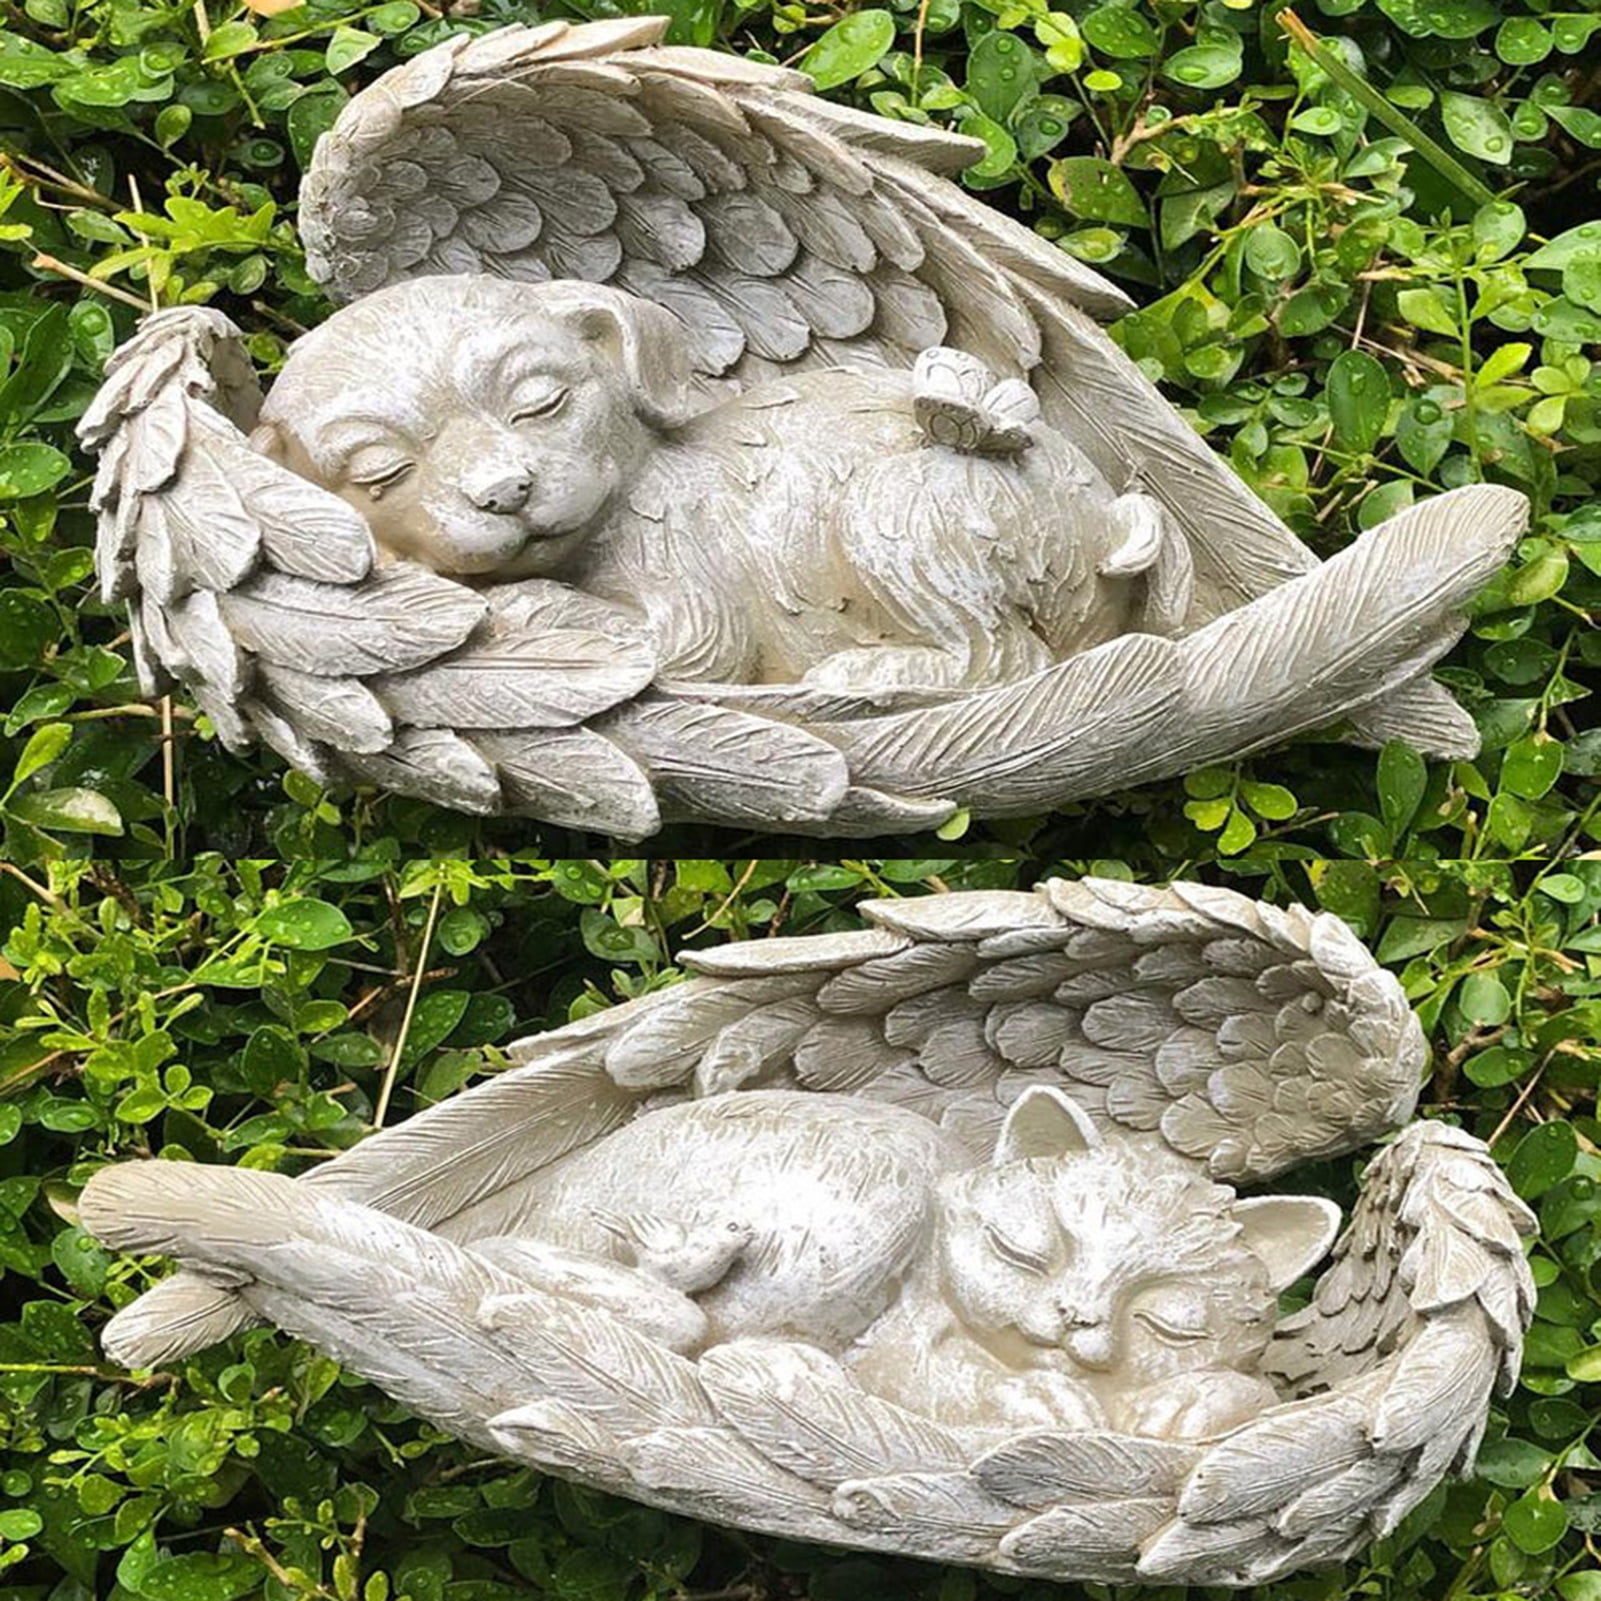 Details about   Resin Home Garden Sleeping Puppy Dog Statue Figurines Decorations 